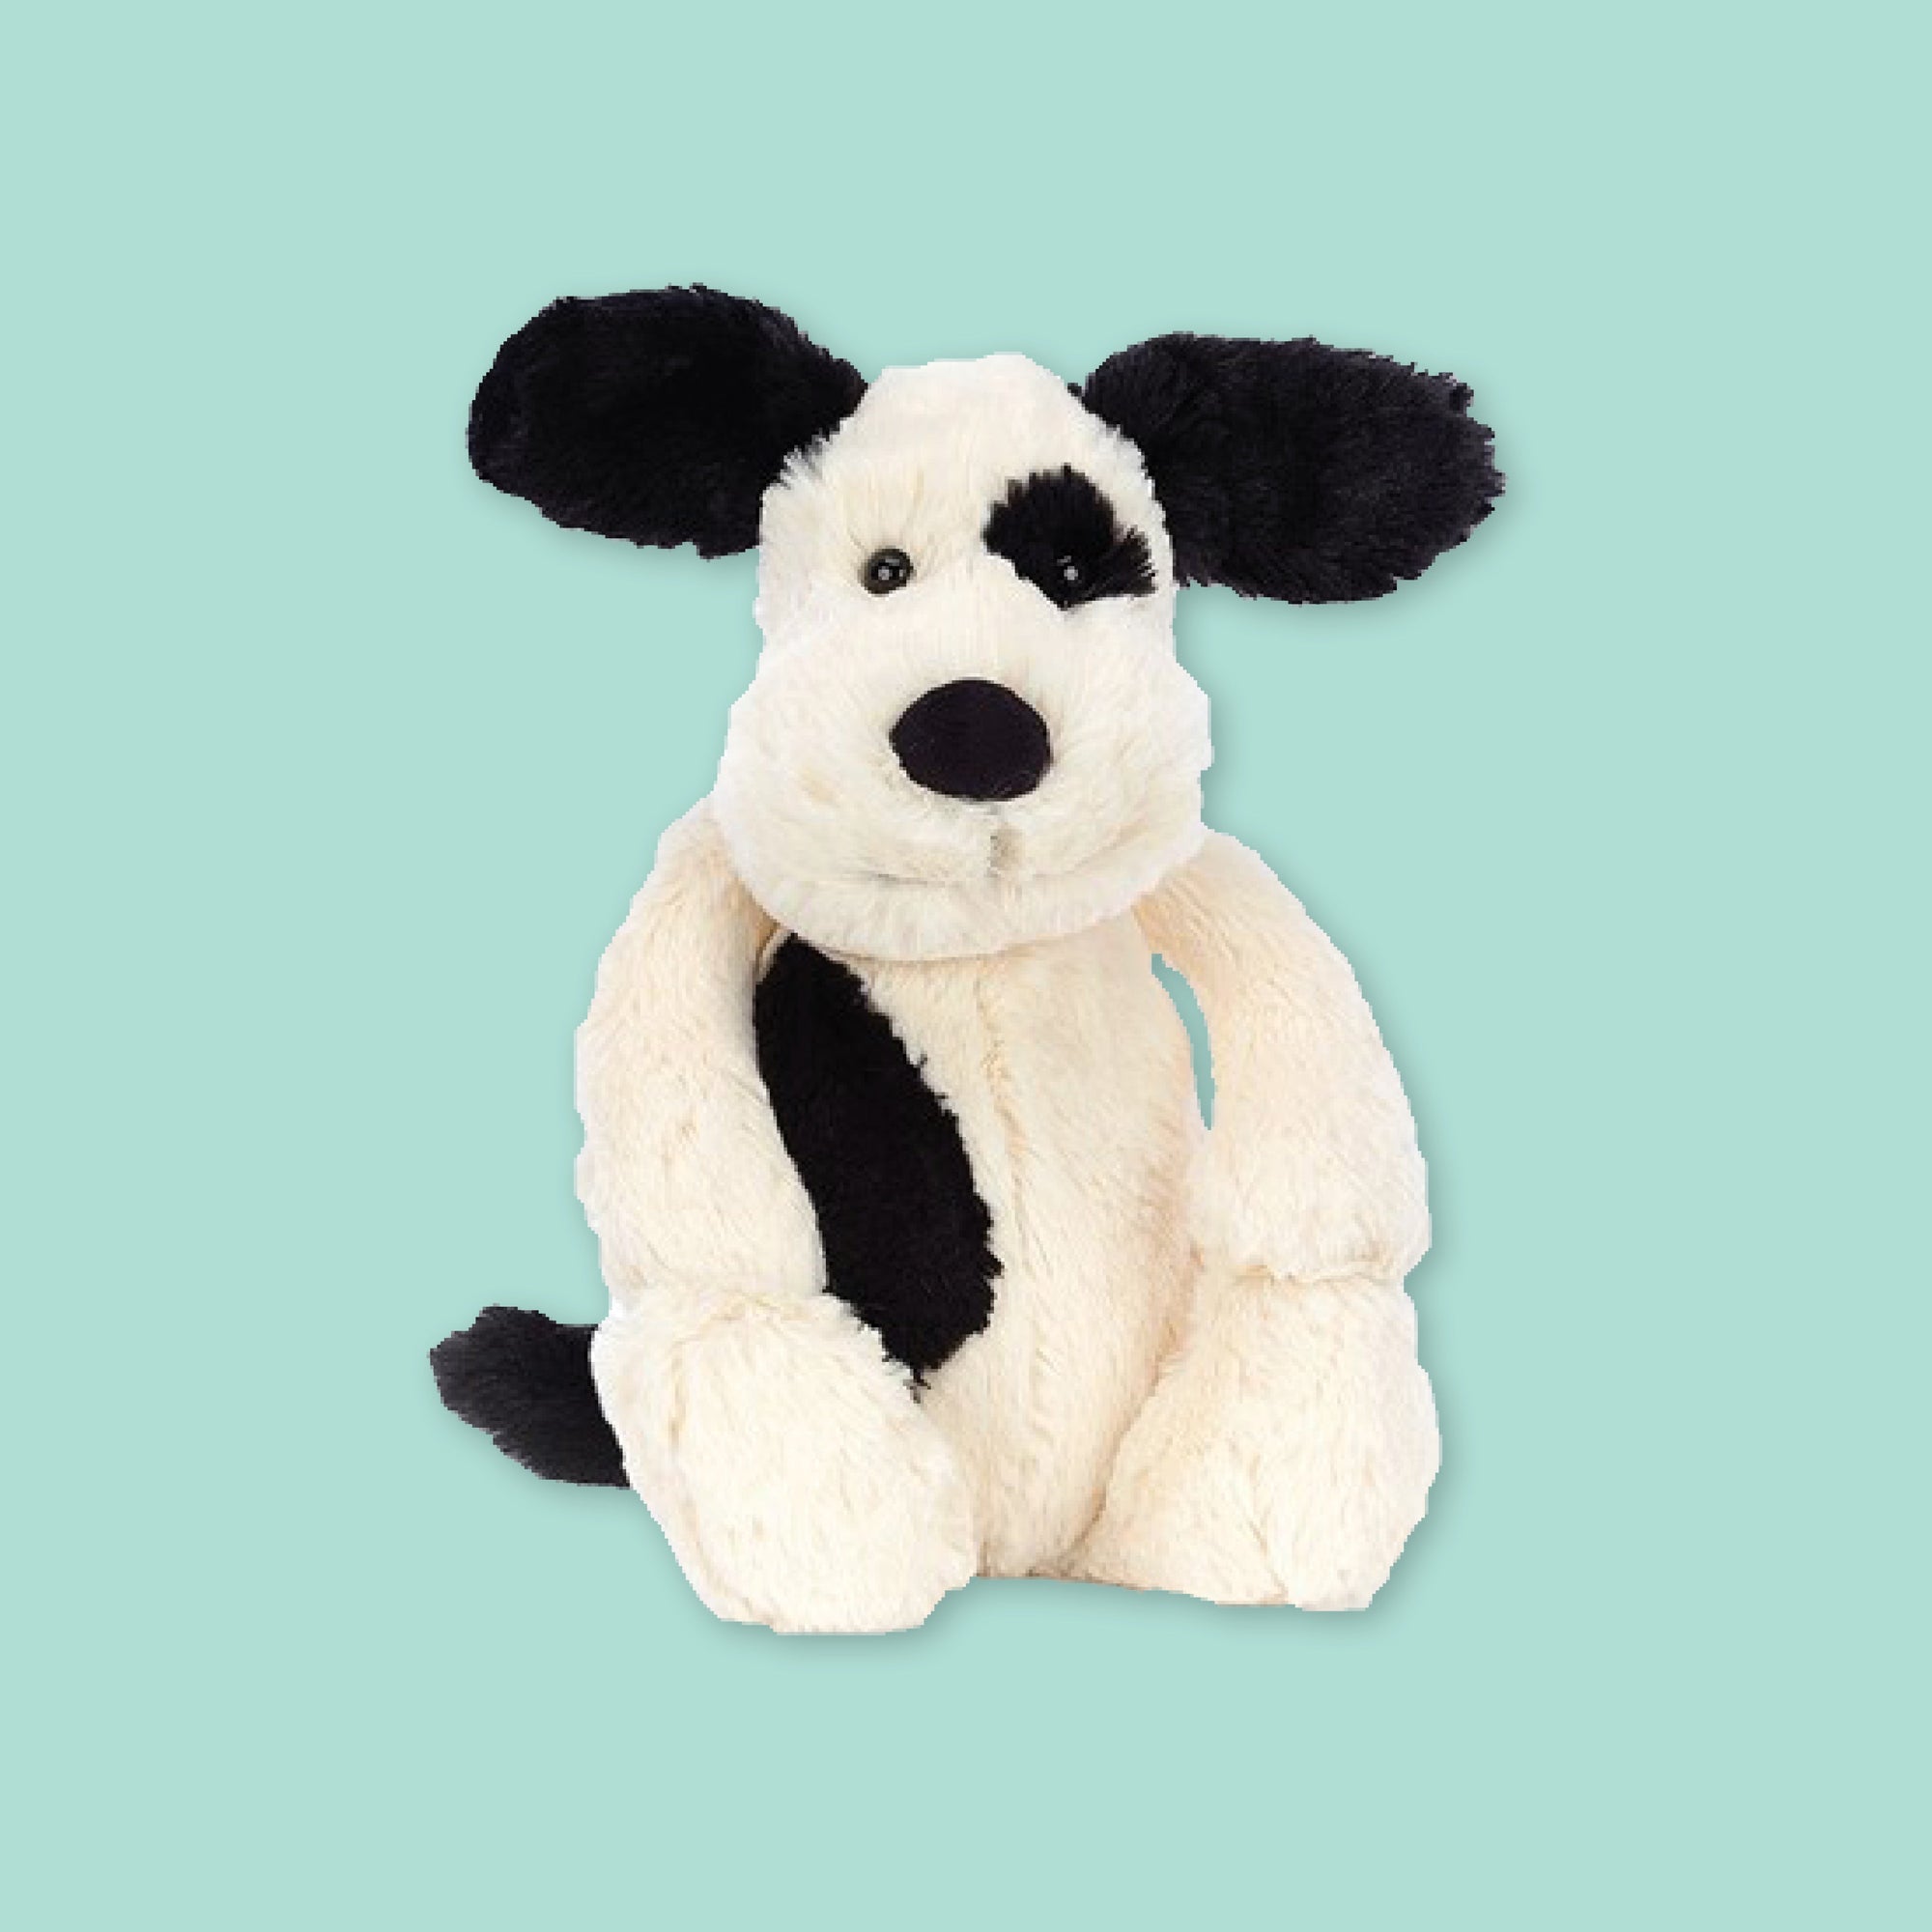 On a mint green background sits a stuffed animal. This black and white puppy plushie is soft and cuddly.